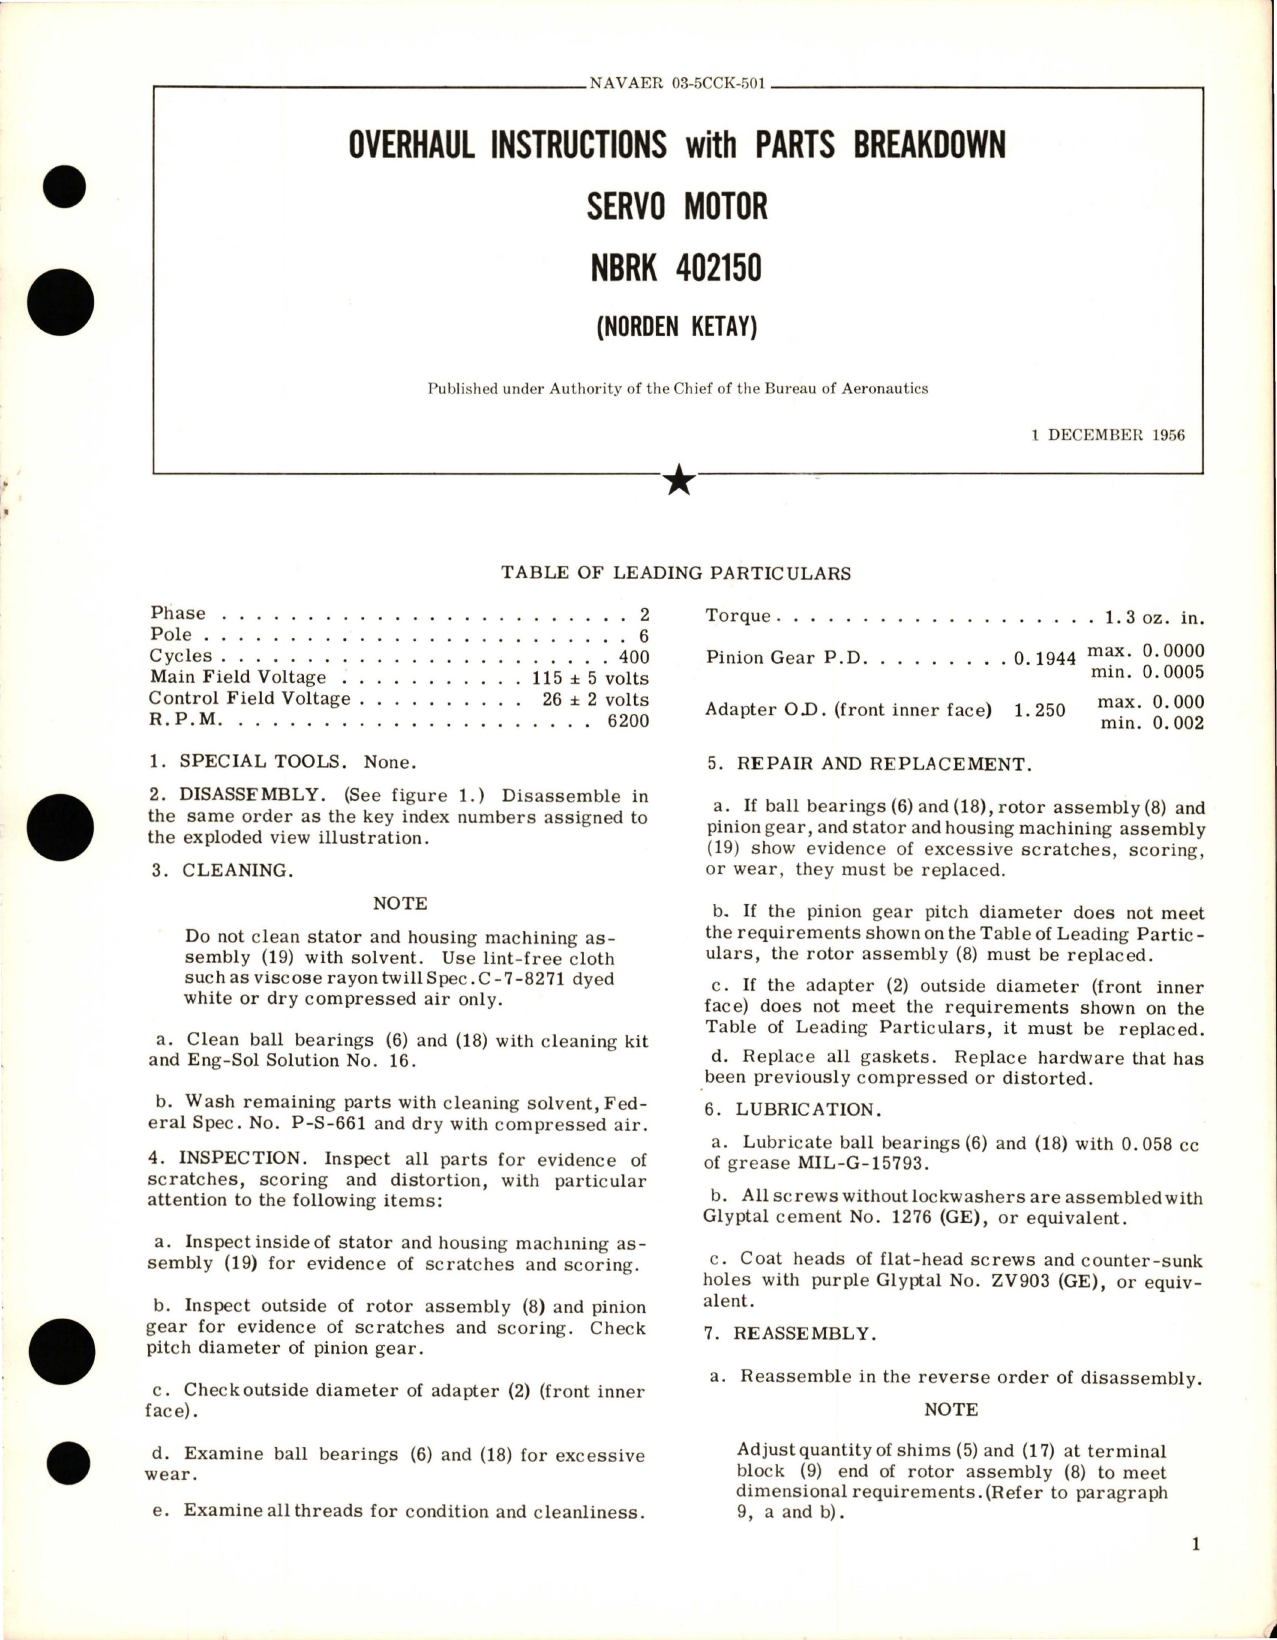 Sample page 1 from AirCorps Library document: Overhaul Instructions with Parts Breakdown for Servo Motor - NBRK 402150 